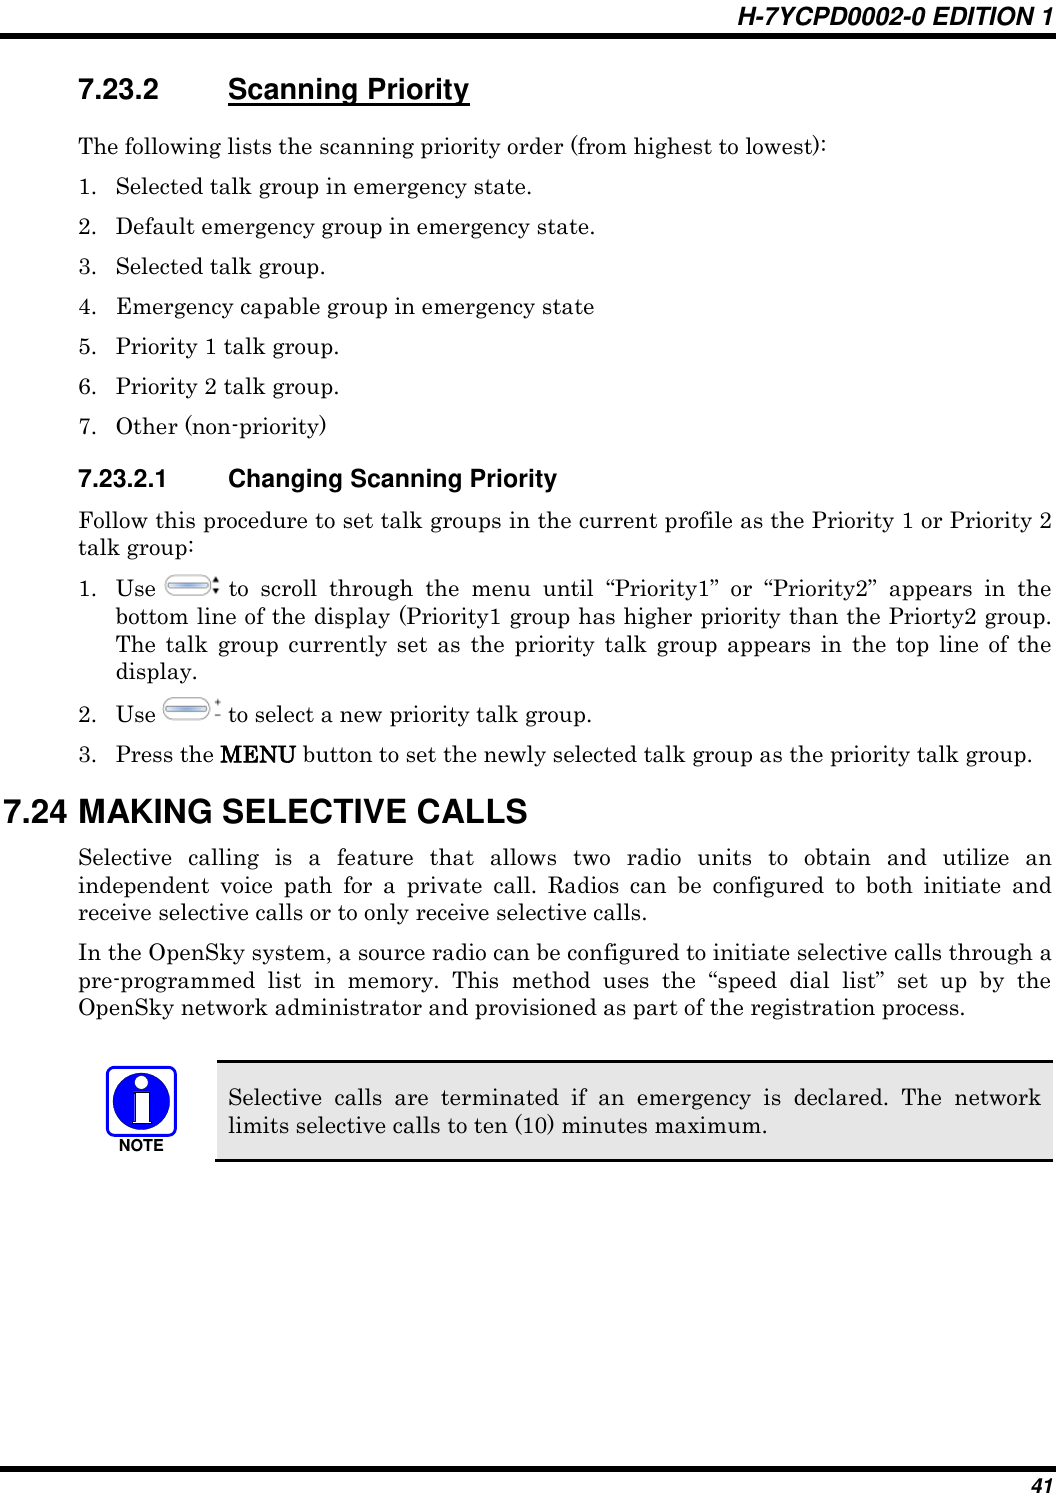 H-7YCPD0002-0 EDITION 1 41 7.23.2  Scanning Priority The following lists the scanning priority order (from highest to lowest): 1. Selected talk group in emergency state. 2. Default emergency group in emergency state. 3. Selected talk group. 4. Emergency capable group in emergency state 5. Priority 1 talk group. 6. Priority 2 talk group. 7. Other (non-priority) 7.23.2.1  Changing Scanning Priority Follow this procedure to set talk groups in the current profile as the Priority 1 or Priority 2 talk group: 1. Use   to  scroll  through  the  menu  until  “Priority1”  or  “Priority2”  appears  in  the bottom line of the display (Priority1 group has higher priority than the Priorty2 group. The  talk  group currently set  as  the  priority  talk  group  appears  in  the  top line  of  the display. 2. Use   to select a new priority talk group. 3. Press the MENU button to set the newly selected talk group as the priority talk group. 7.24 MAKING SELECTIVE CALLS Selective  calling  is  a  feature  that  allows  two  radio  units  to  obtain  and  utilize  an independent  voice  path  for  a  private  call.  Radios  can  be  configured  to  both  initiate  and receive selective calls or to only receive selective calls. In the OpenSky system, a source radio can be configured to initiate selective calls through a pre-programmed  list  in  memory.  This  method  uses  the  “speed  dial  list”  set  up  by  the OpenSky network administrator and provisioned as part of the registration process.  NOTE Selective  calls  are  terminated  if  an  emergency  is  declared.  The  network limits selective calls to ten (10) minutes maximum.  